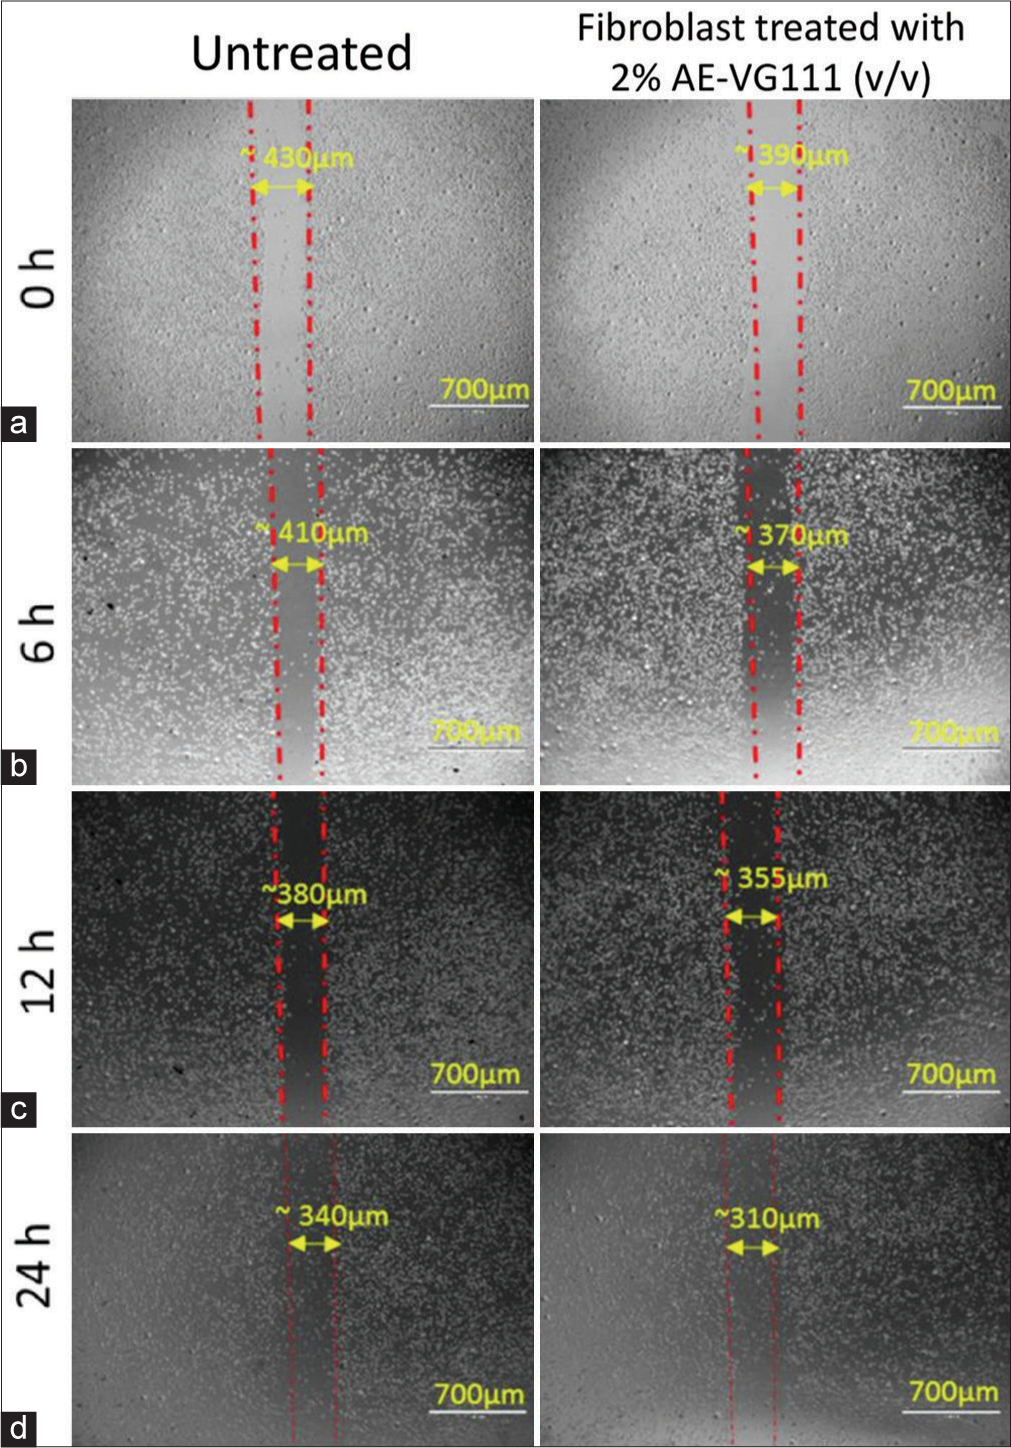 (a-d) Scratch assay: Quantitative evaluation of in vitro cell migration by phase contrast microscopy of mouse fibroblast cell line (L929) monolayers after the creation of the scratch wound and following 0, 6, 12 and 24 h exposure to the 2% AE-VG111 (v/v) treatment. Scratch assay: Quantitative evaluation of in vitro cell migration by phase contrast microscopy of mouse fibroblast cell line (L929) monolayers after the creation of the scratch wound and following 0, 6, 12 and 24 h exposure to the 2% AE-VG111 (v/v) treatment. AE-VG111: Aqueous extract of VG111.